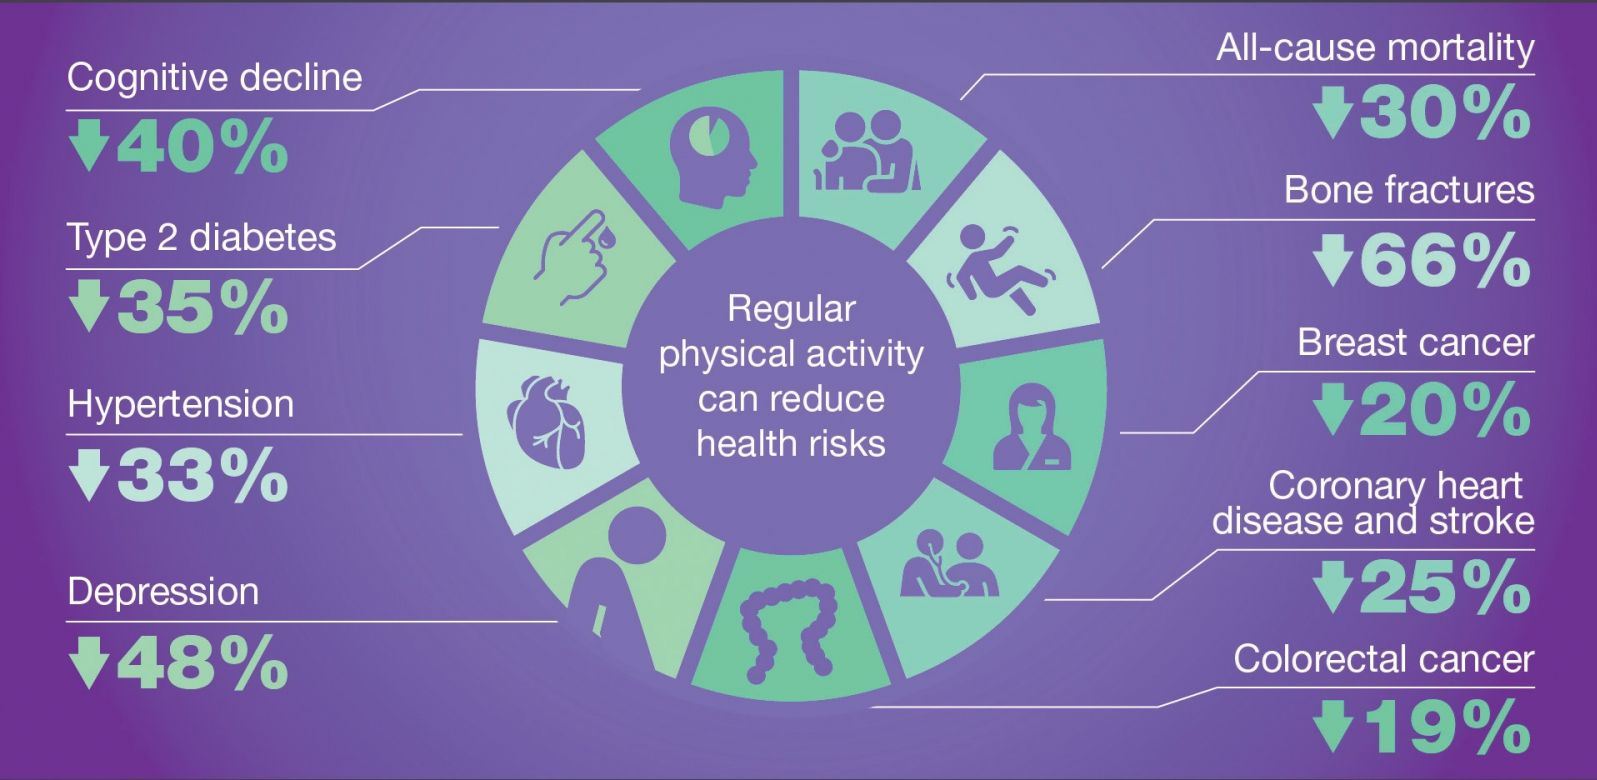 Regularly active people have lower health risks